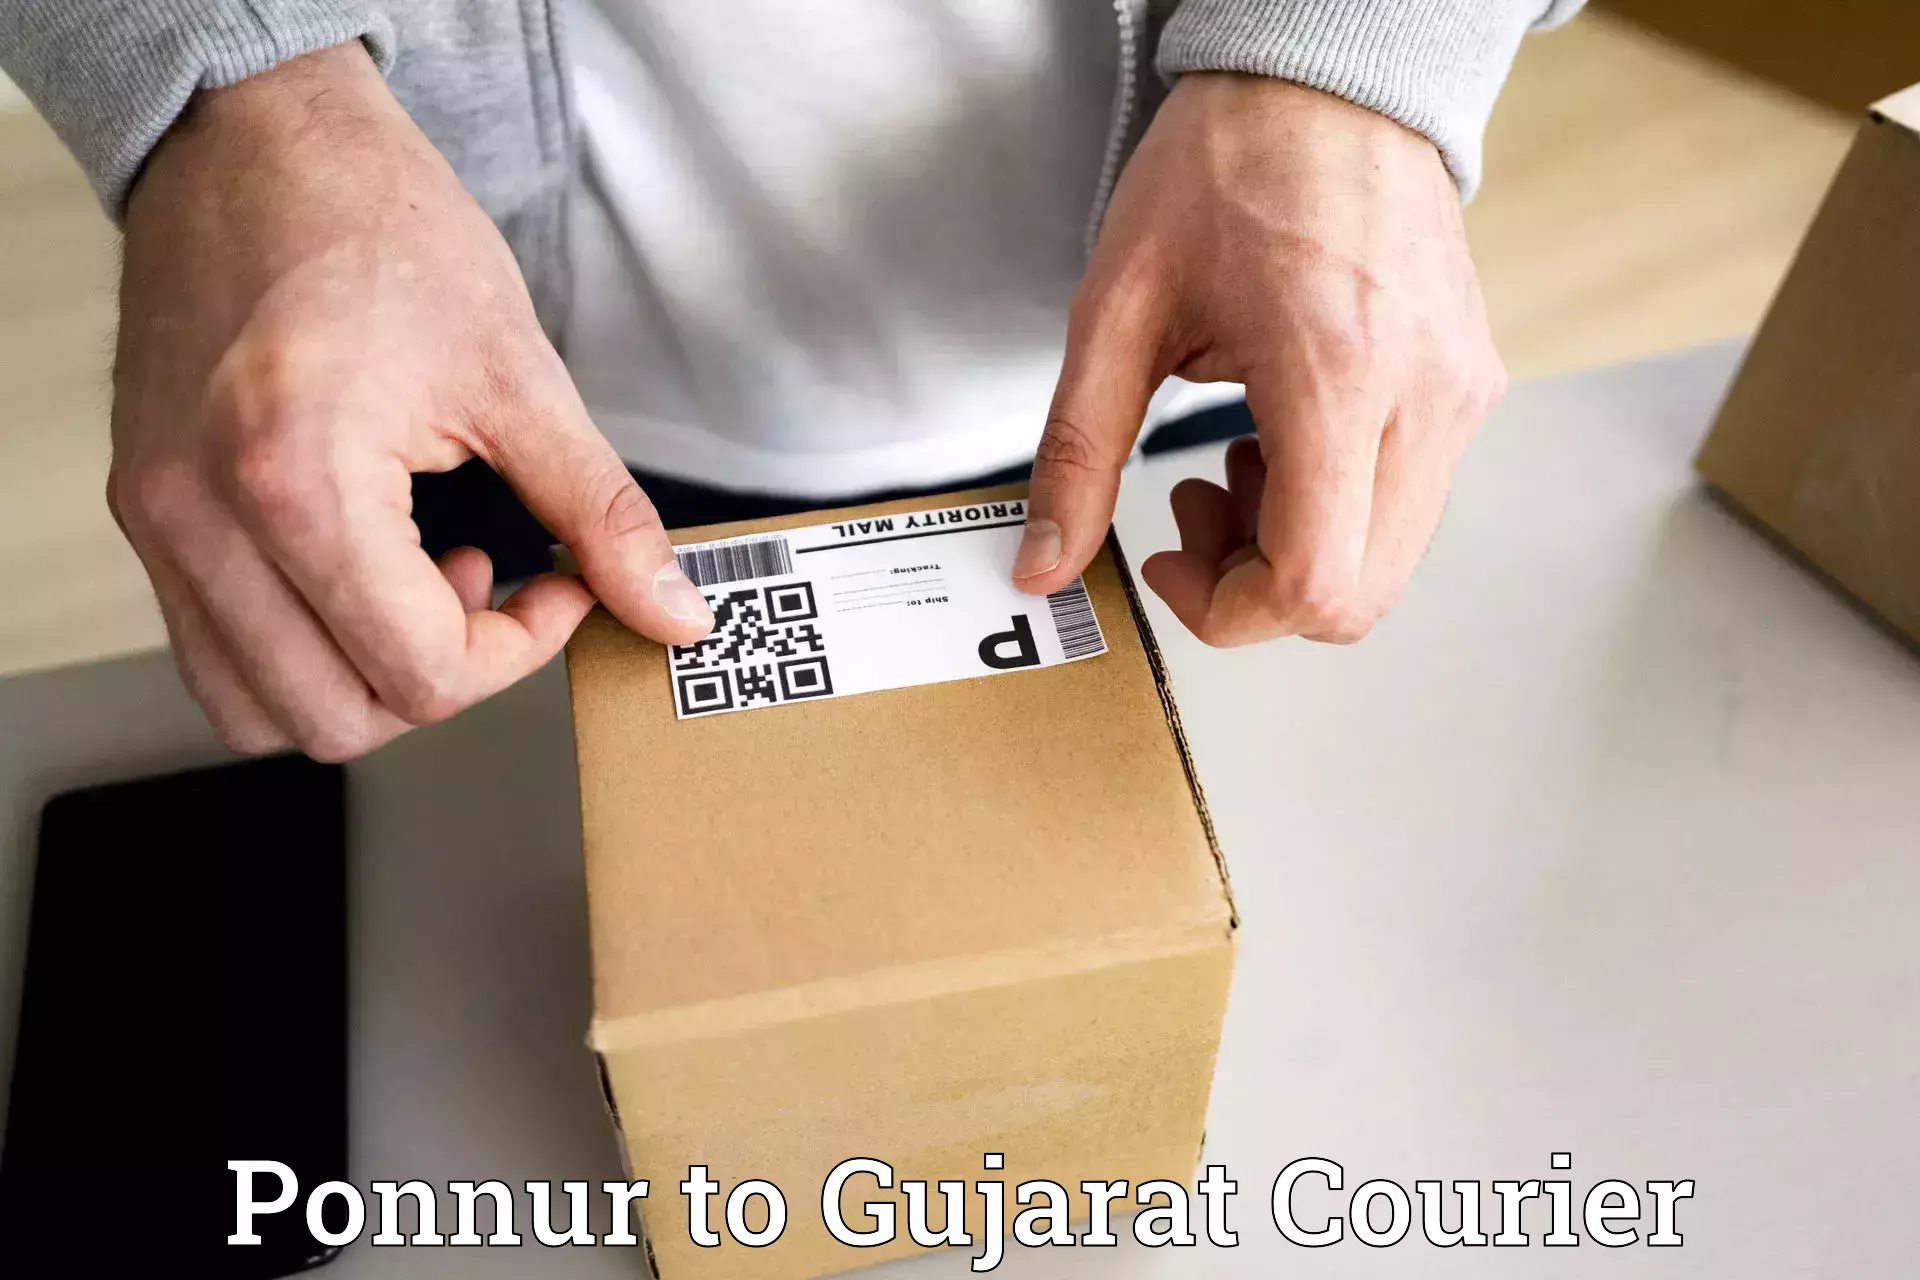 User-friendly courier app Ponnur to Ahmedabad